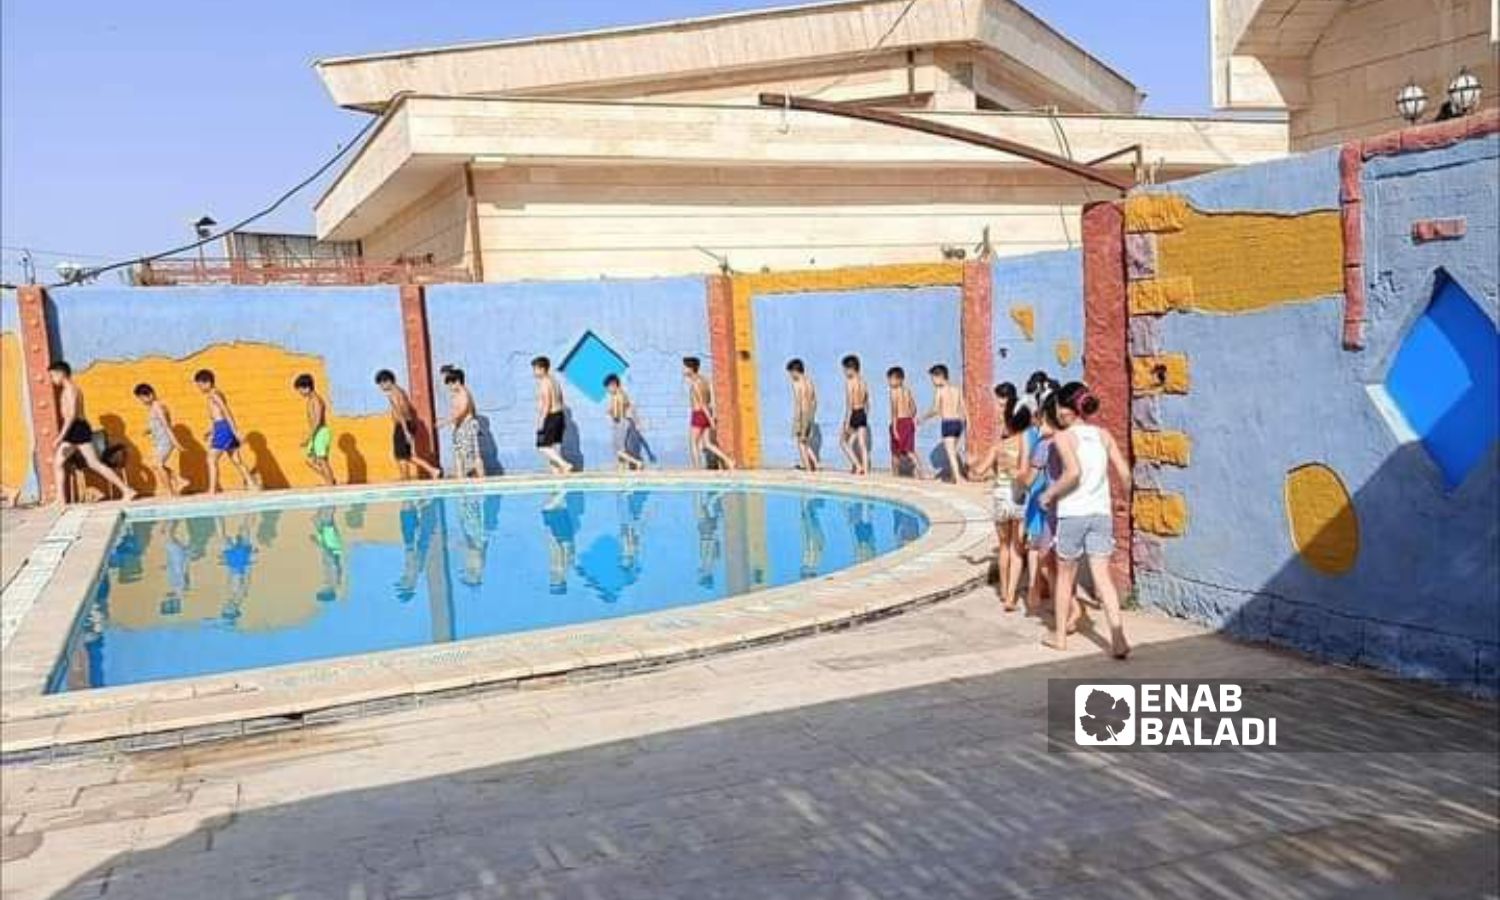 One of the activities of summer recreational clubs for children in Daraa, southern Syria - July 28, 2023 (Enab Baladi/Sarah al-Ahmad)